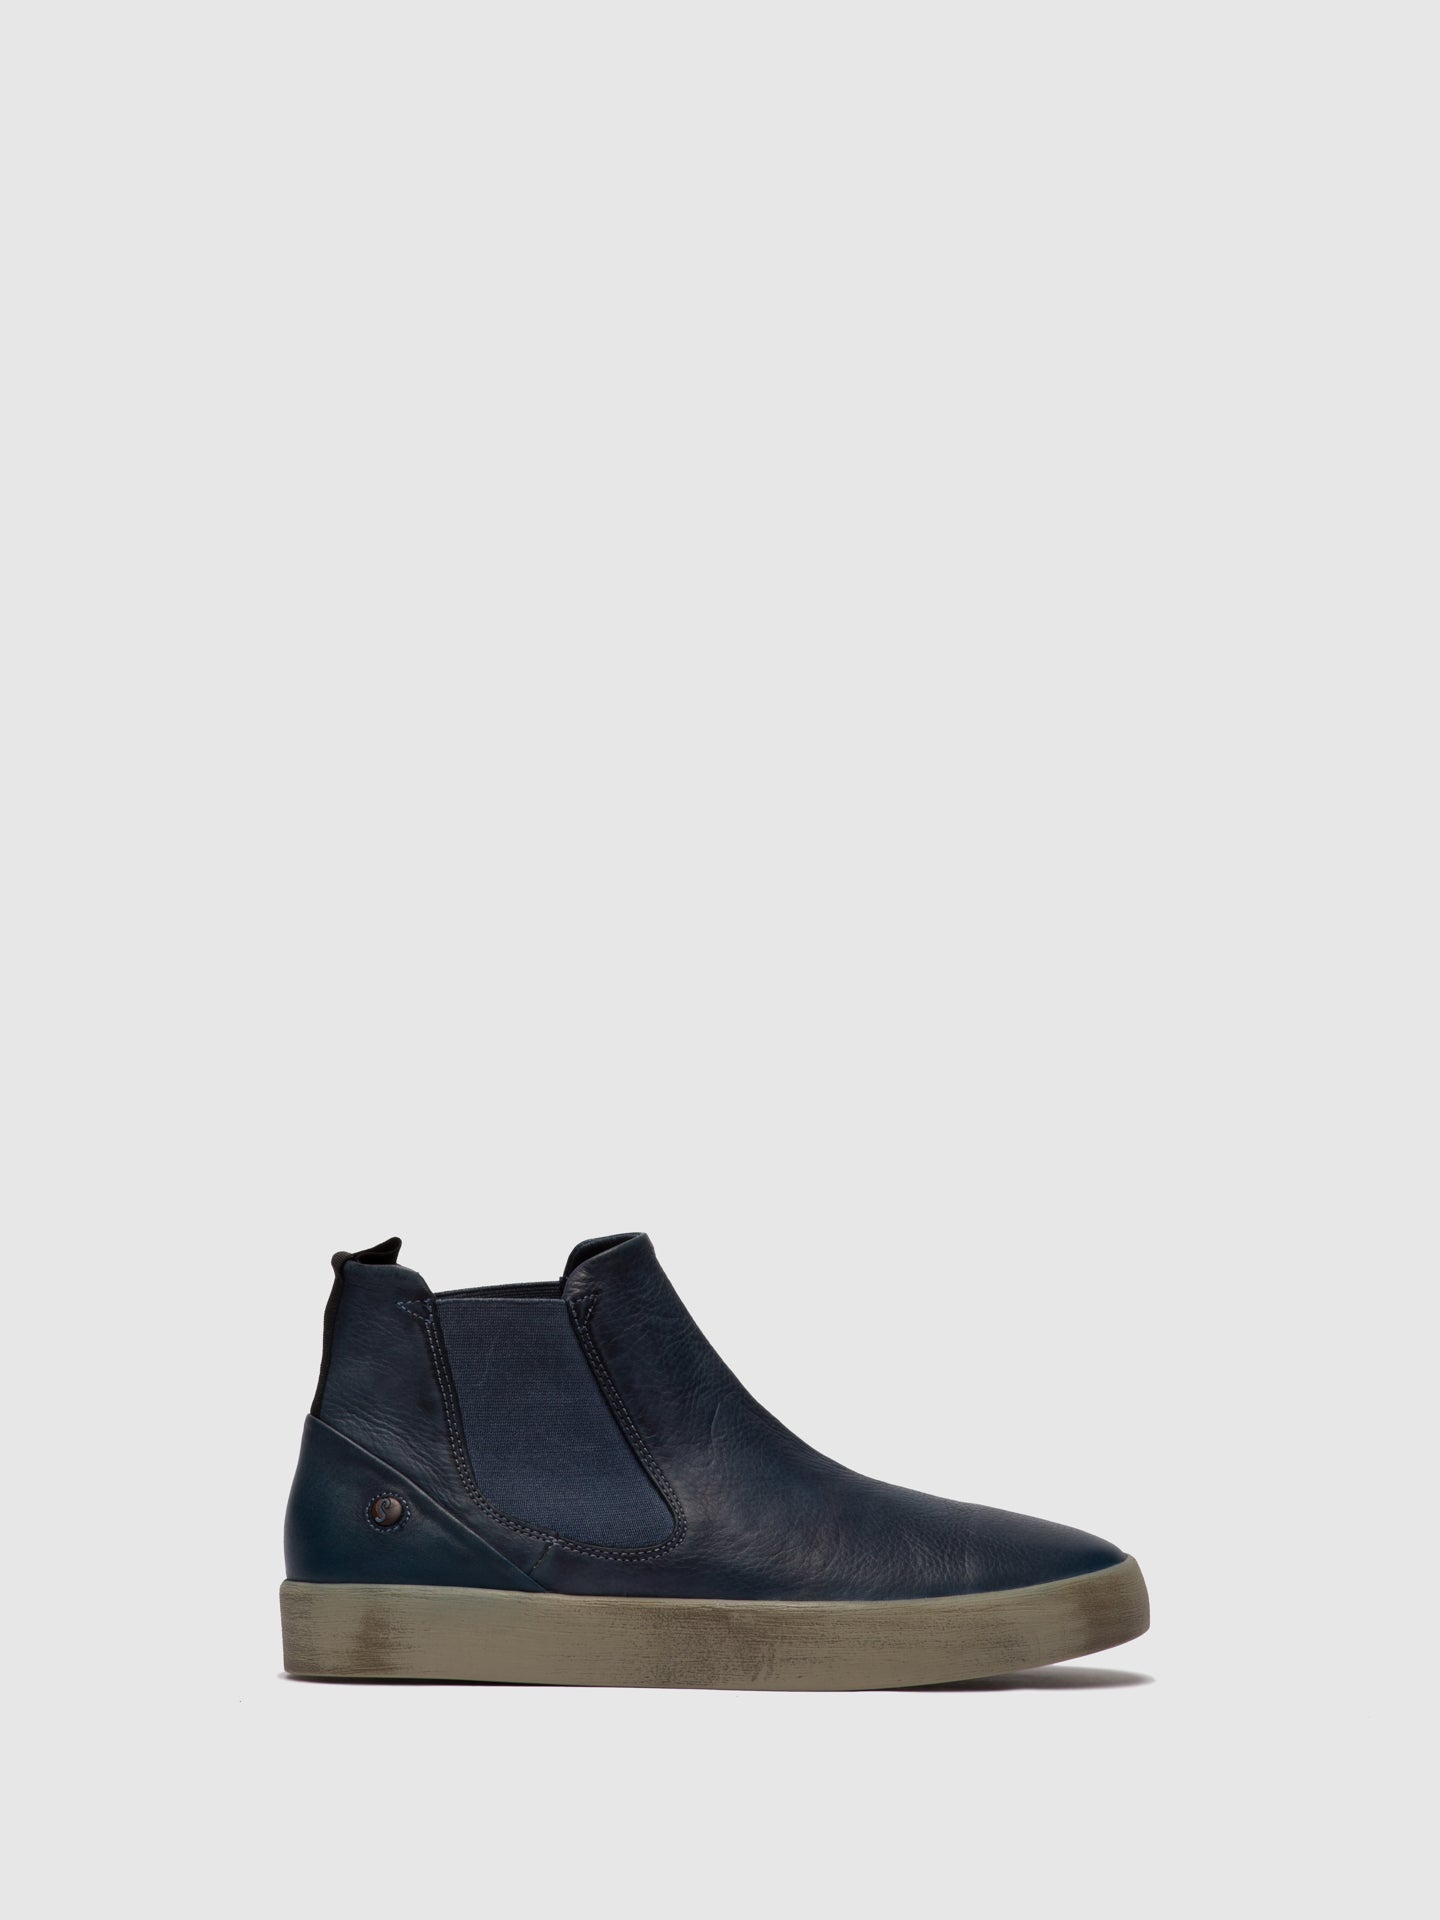 mens chelsea boots cyber monday